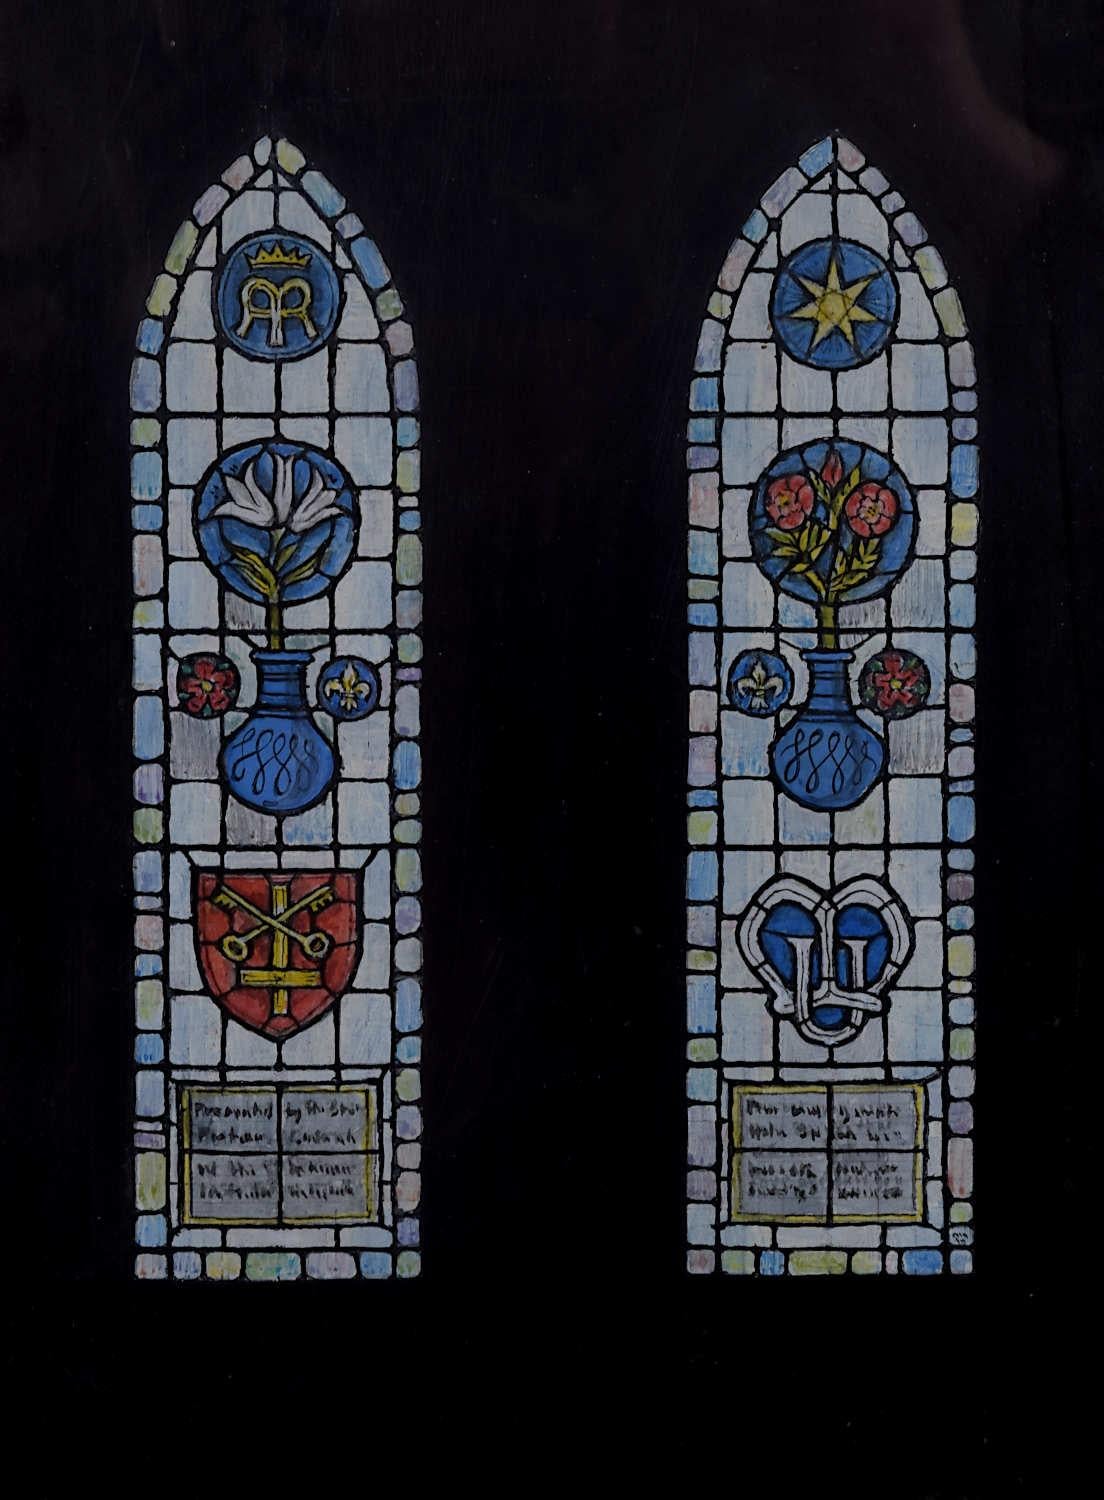 We acquired a series of watercolour stained glass designs from Jane Gray's studio. To find more scroll down to "More from this Seller" and below it click on "See all from this seller." 

Jane Gray (b.1931)
Stained Glass Design
Watercolour
18 x 13